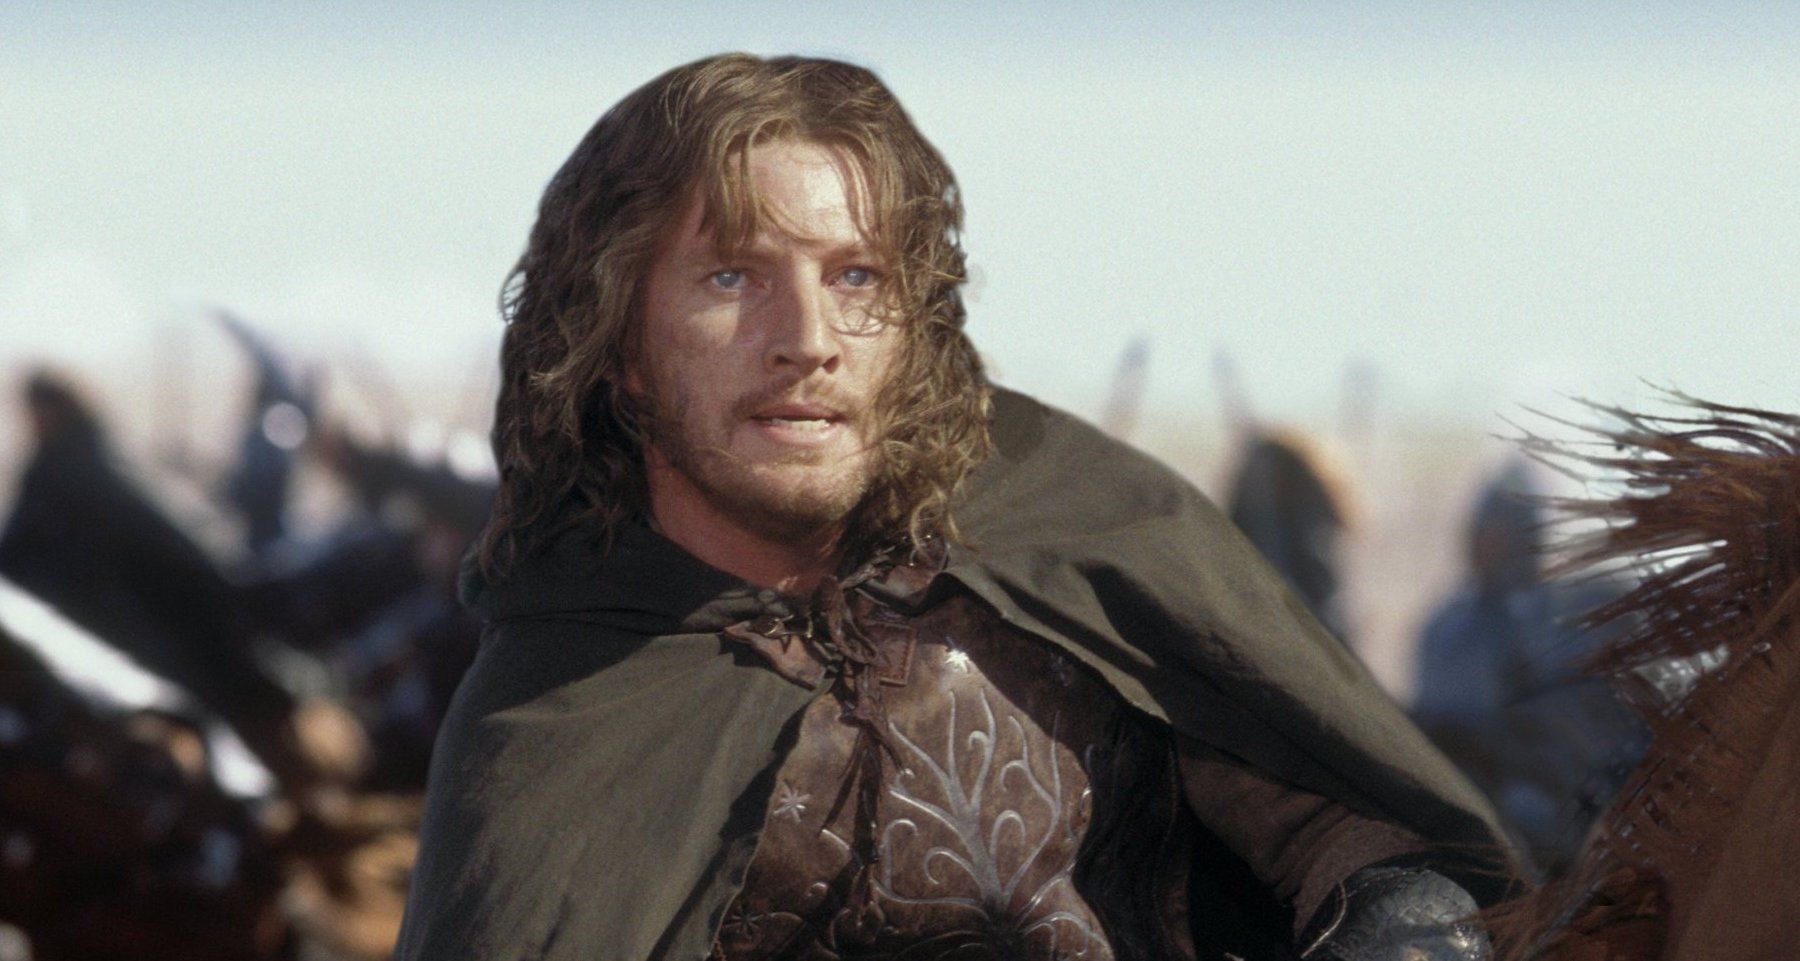 Faramir in the Lord of the Rings